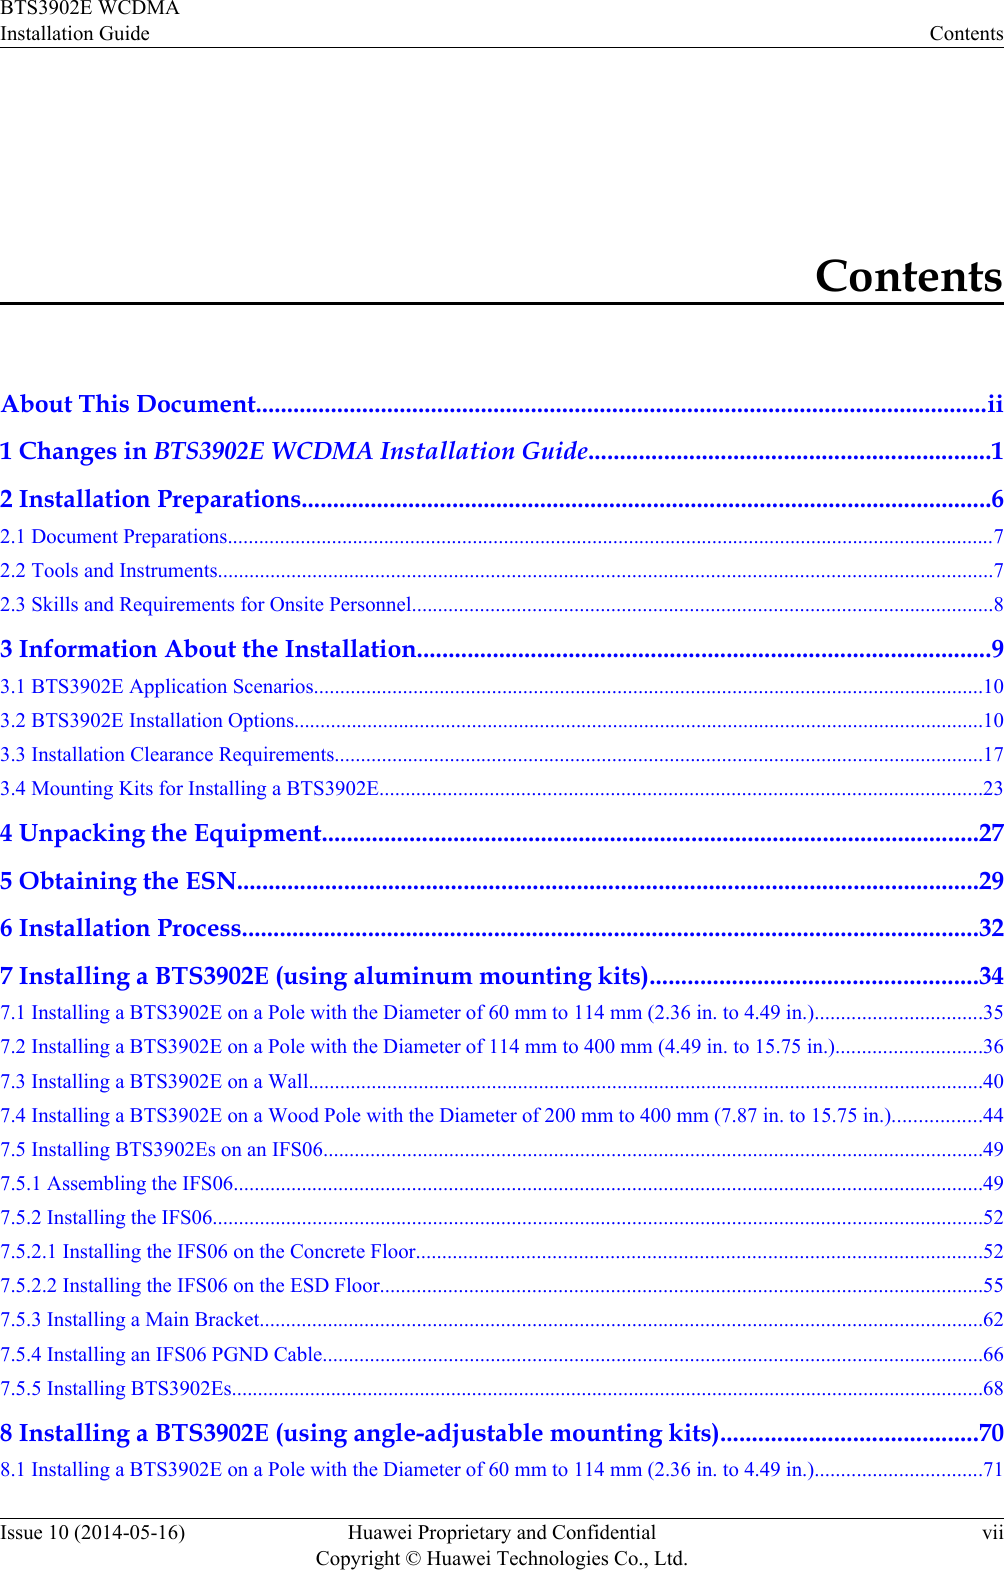 ContentsAbout This Document.....................................................................................................................ii1 Changes in BTS3902E WCDMA Installation Guide................................................................12 Installation Preparations..............................................................................................................62.1 Document Preparations...................................................................................................................................................72.2 Tools and Instruments....................................................................................................................................................72.3 Skills and Requirements for Onsite Personnel...............................................................................................................83 Information About the Installation...........................................................................................93.1 BTS3902E Application Scenarios................................................................................................................................103.2 BTS3902E Installation Options....................................................................................................................................103.3 Installation Clearance Requirements............................................................................................................................173.4 Mounting Kits for Installing a BTS3902E...................................................................................................................234 Unpacking the Equipment.........................................................................................................275 Obtaining the ESN......................................................................................................................296 Installation Process.....................................................................................................................327 Installing a BTS3902E (using aluminum mounting kits)....................................................347.1 Installing a BTS3902E on a Pole with the Diameter of 60 mm to 114 mm (2.36 in. to 4.49 in.)................................357.2 Installing a BTS3902E on a Pole with the Diameter of 114 mm to 400 mm (4.49 in. to 15.75 in.)............................367.3 Installing a BTS3902E on a Wall.................................................................................................................................407.4 Installing a BTS3902E on a Wood Pole with the Diameter of 200 mm to 400 mm (7.87 in. to 15.75 in.).................447.5 Installing BTS3902Es on an IFS06..............................................................................................................................497.5.1 Assembling the IFS06...............................................................................................................................................497.5.2 Installing the IFS06...................................................................................................................................................527.5.2.1 Installing the IFS06 on the Concrete Floor............................................................................................................527.5.2.2 Installing the IFS06 on the ESD Floor...................................................................................................................557.5.3 Installing a Main Bracket..........................................................................................................................................627.5.4 Installing an IFS06 PGND Cable..............................................................................................................................667.5.5 Installing BTS3902Es................................................................................................................................................688 Installing a BTS3902E (using angle-adjustable mounting kits).........................................708.1 Installing a BTS3902E on a Pole with the Diameter of 60 mm to 114 mm (2.36 in. to 4.49 in.)................................71BTS3902E WCDMAInstallation Guide ContentsIssue 10 (2014-05-16) Huawei Proprietary and ConfidentialCopyright © Huawei Technologies Co., Ltd.vii